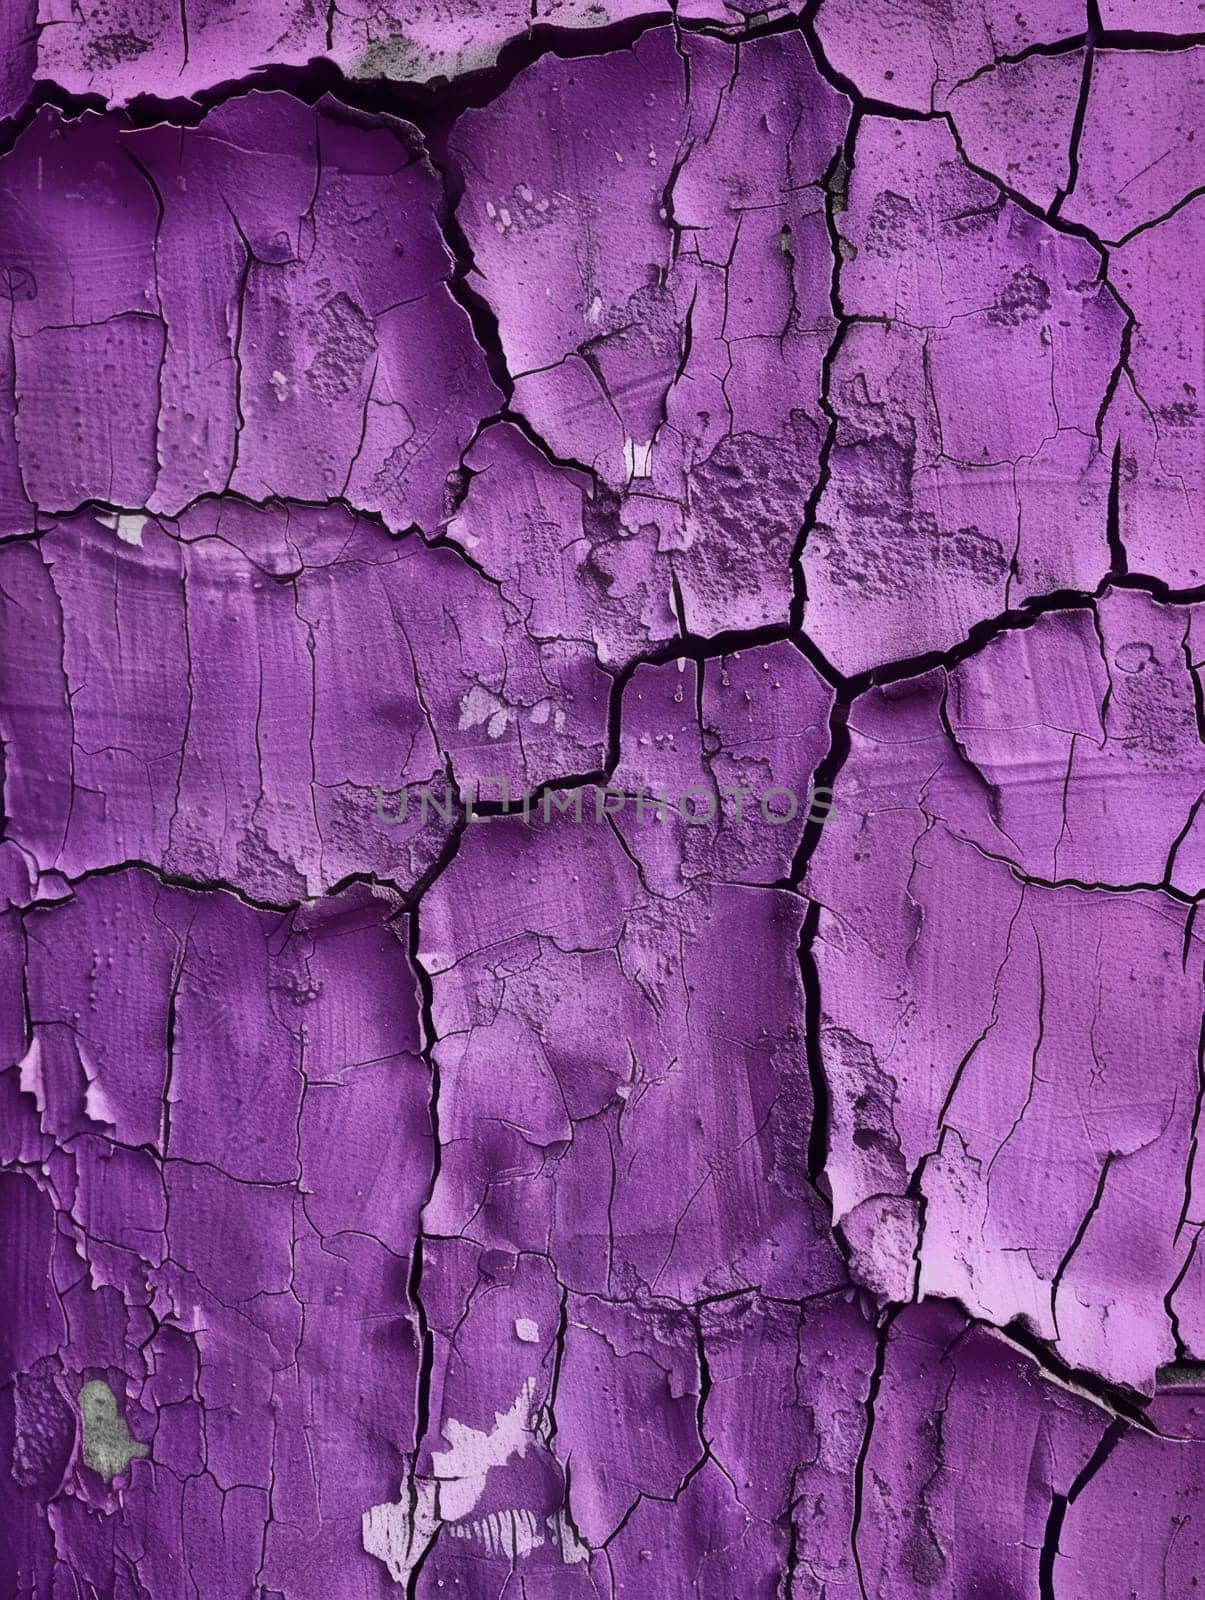 A purple backdrop is dissected by a network of cracks, creating an abstract visual. The texture is a metaphor for the beauty in imperfection and the complexity of surfaces